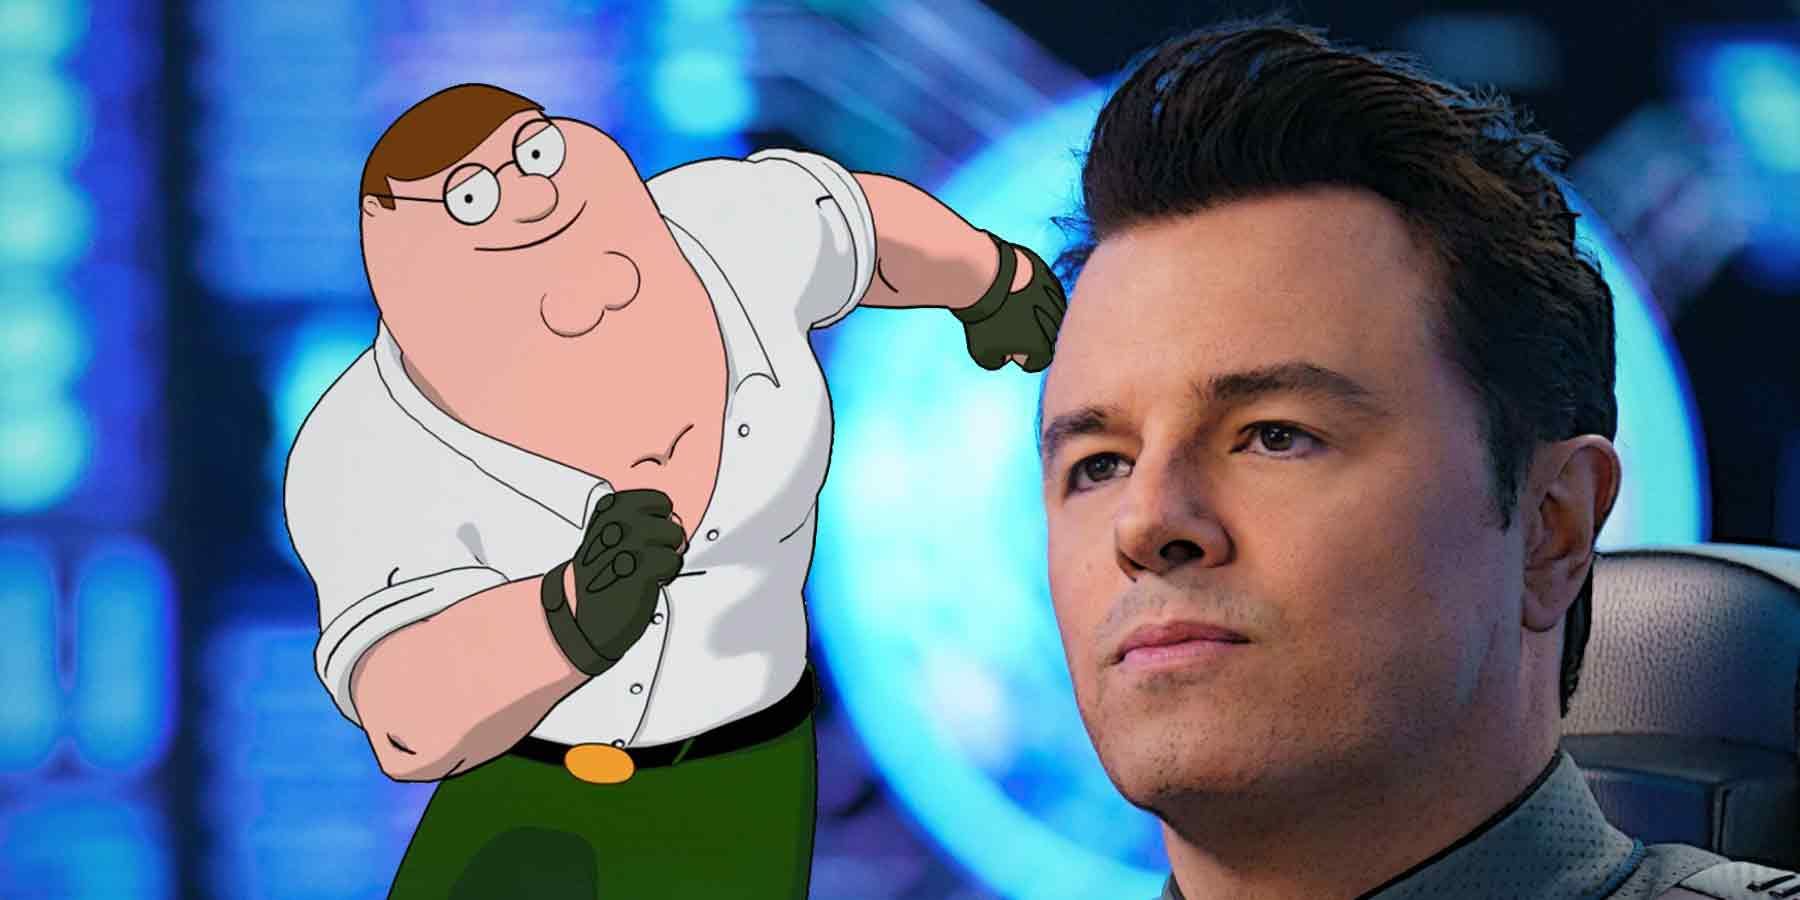 Seth MacFarlane The Orville headshot next to Fortnite Peter Griffin skin composite